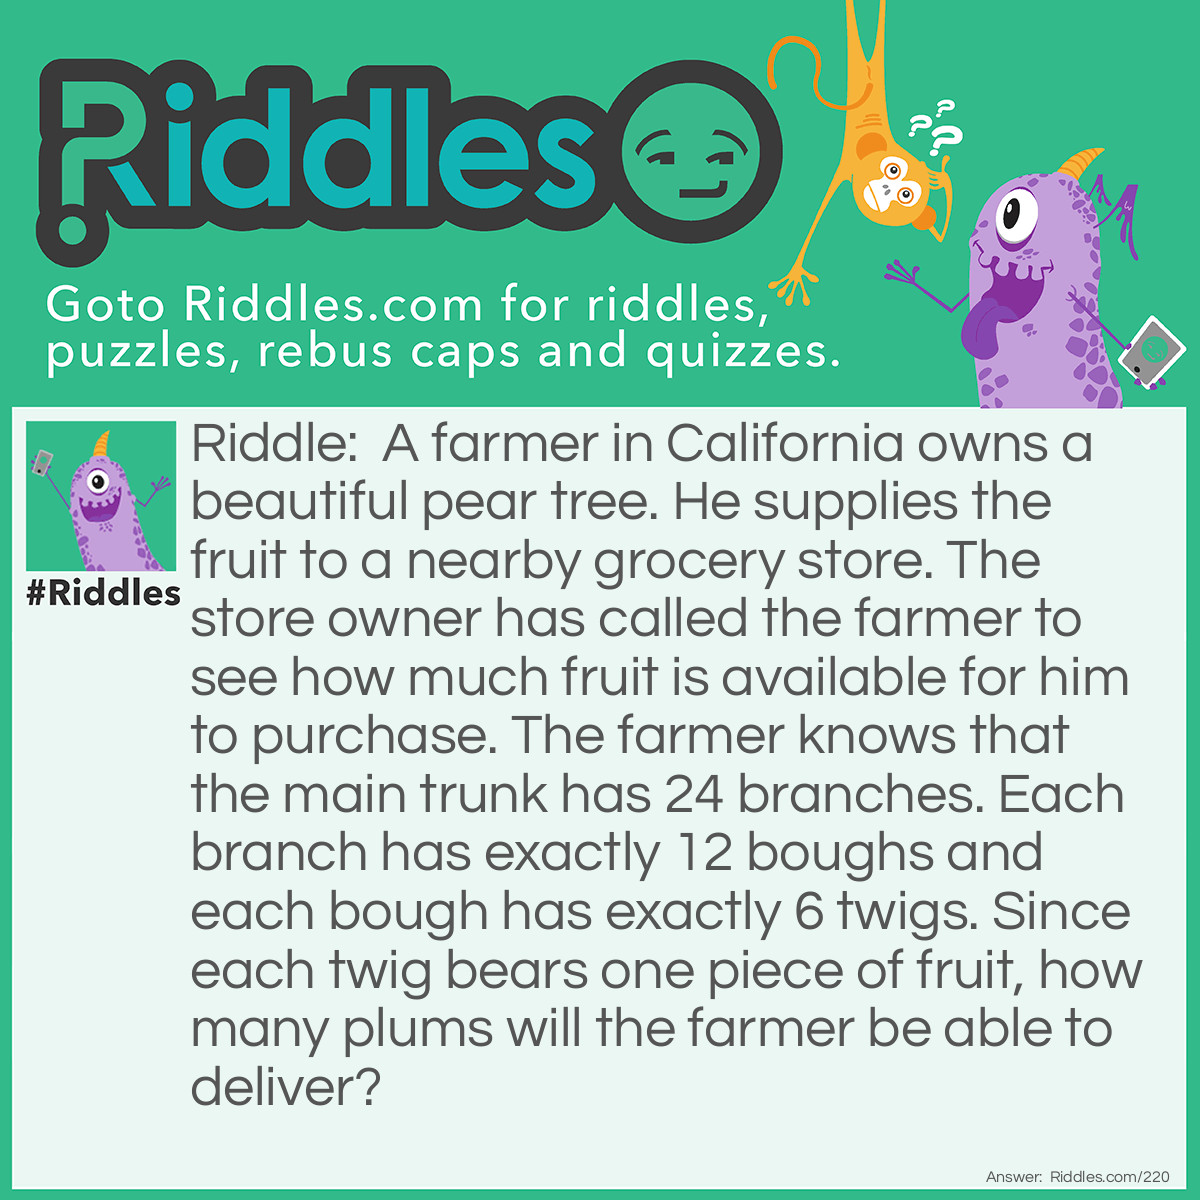 Riddle: A farmer in California owns a beautiful pear tree. He supplies the fruit to a nearby grocery store. The store owner has called the farmer to see how much fruit is available for him to purchase. The farmer knows that the main trunk has 24 branches. Each branch has exactly 12 boughs and each bough has exactly 6 twigs. Since each twig bears one piece of fruit, how many plums will the farmer be able to deliver? Answer: None. A pear tree does not bear plums.